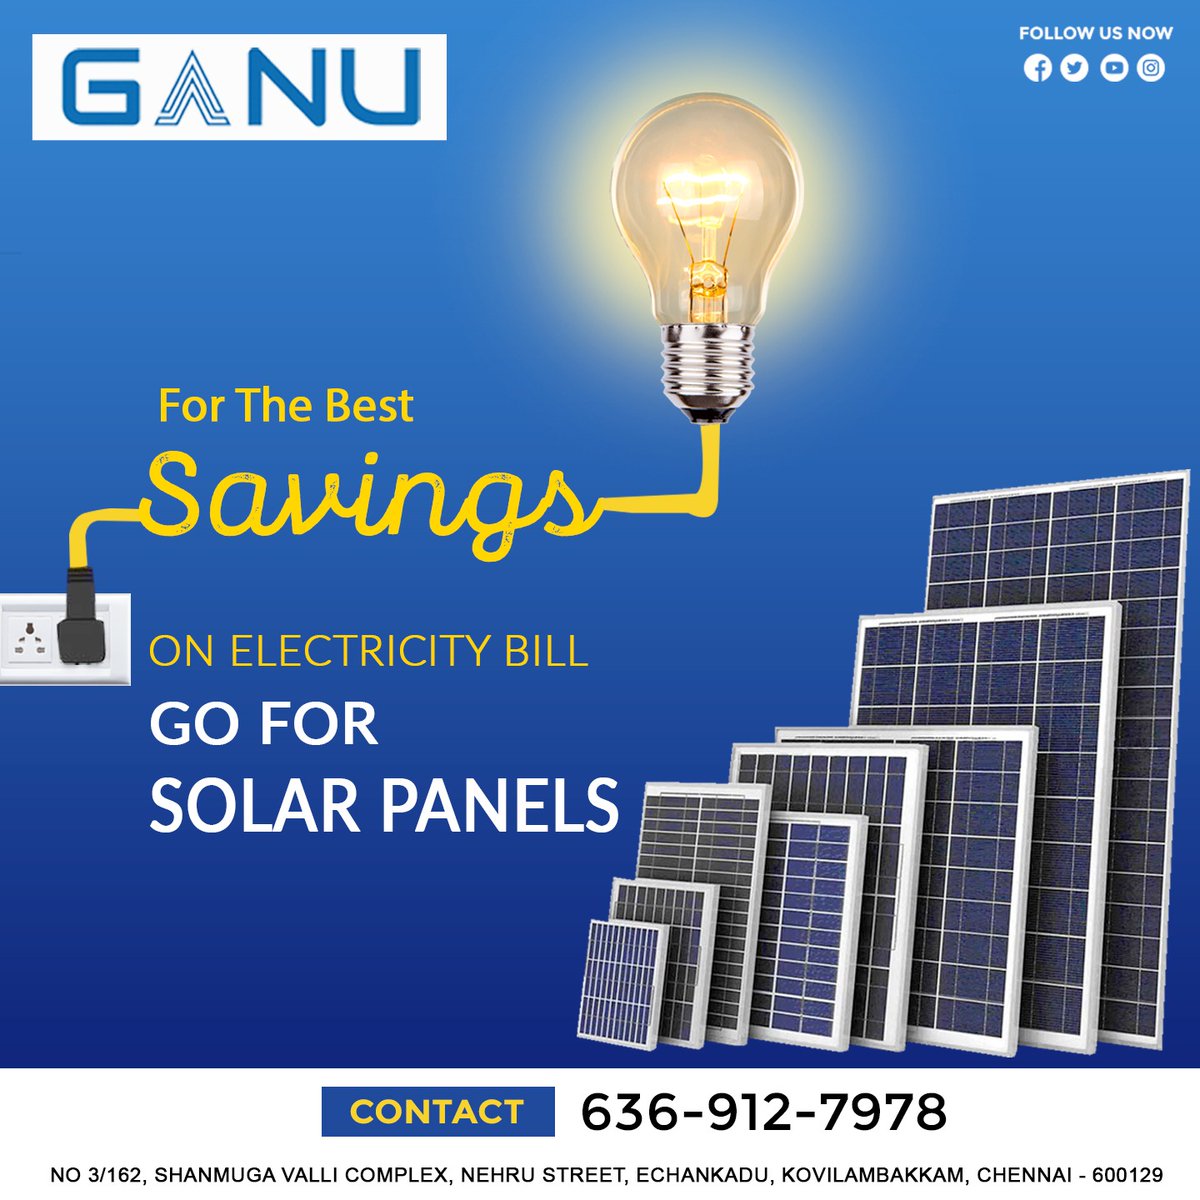 Ganu Energy SOLAR PANEL 'For the best savings on electricity bill go for solar panels' ☎For More Details Call us : 93441 79620 #SolarPower #RenewableEnergy #CleanEnergy #SolarPanel #SustainableLiving #GreenEnergy #SolarEnergy #GoSolar #EnergyEfficiency #SolarInstallation